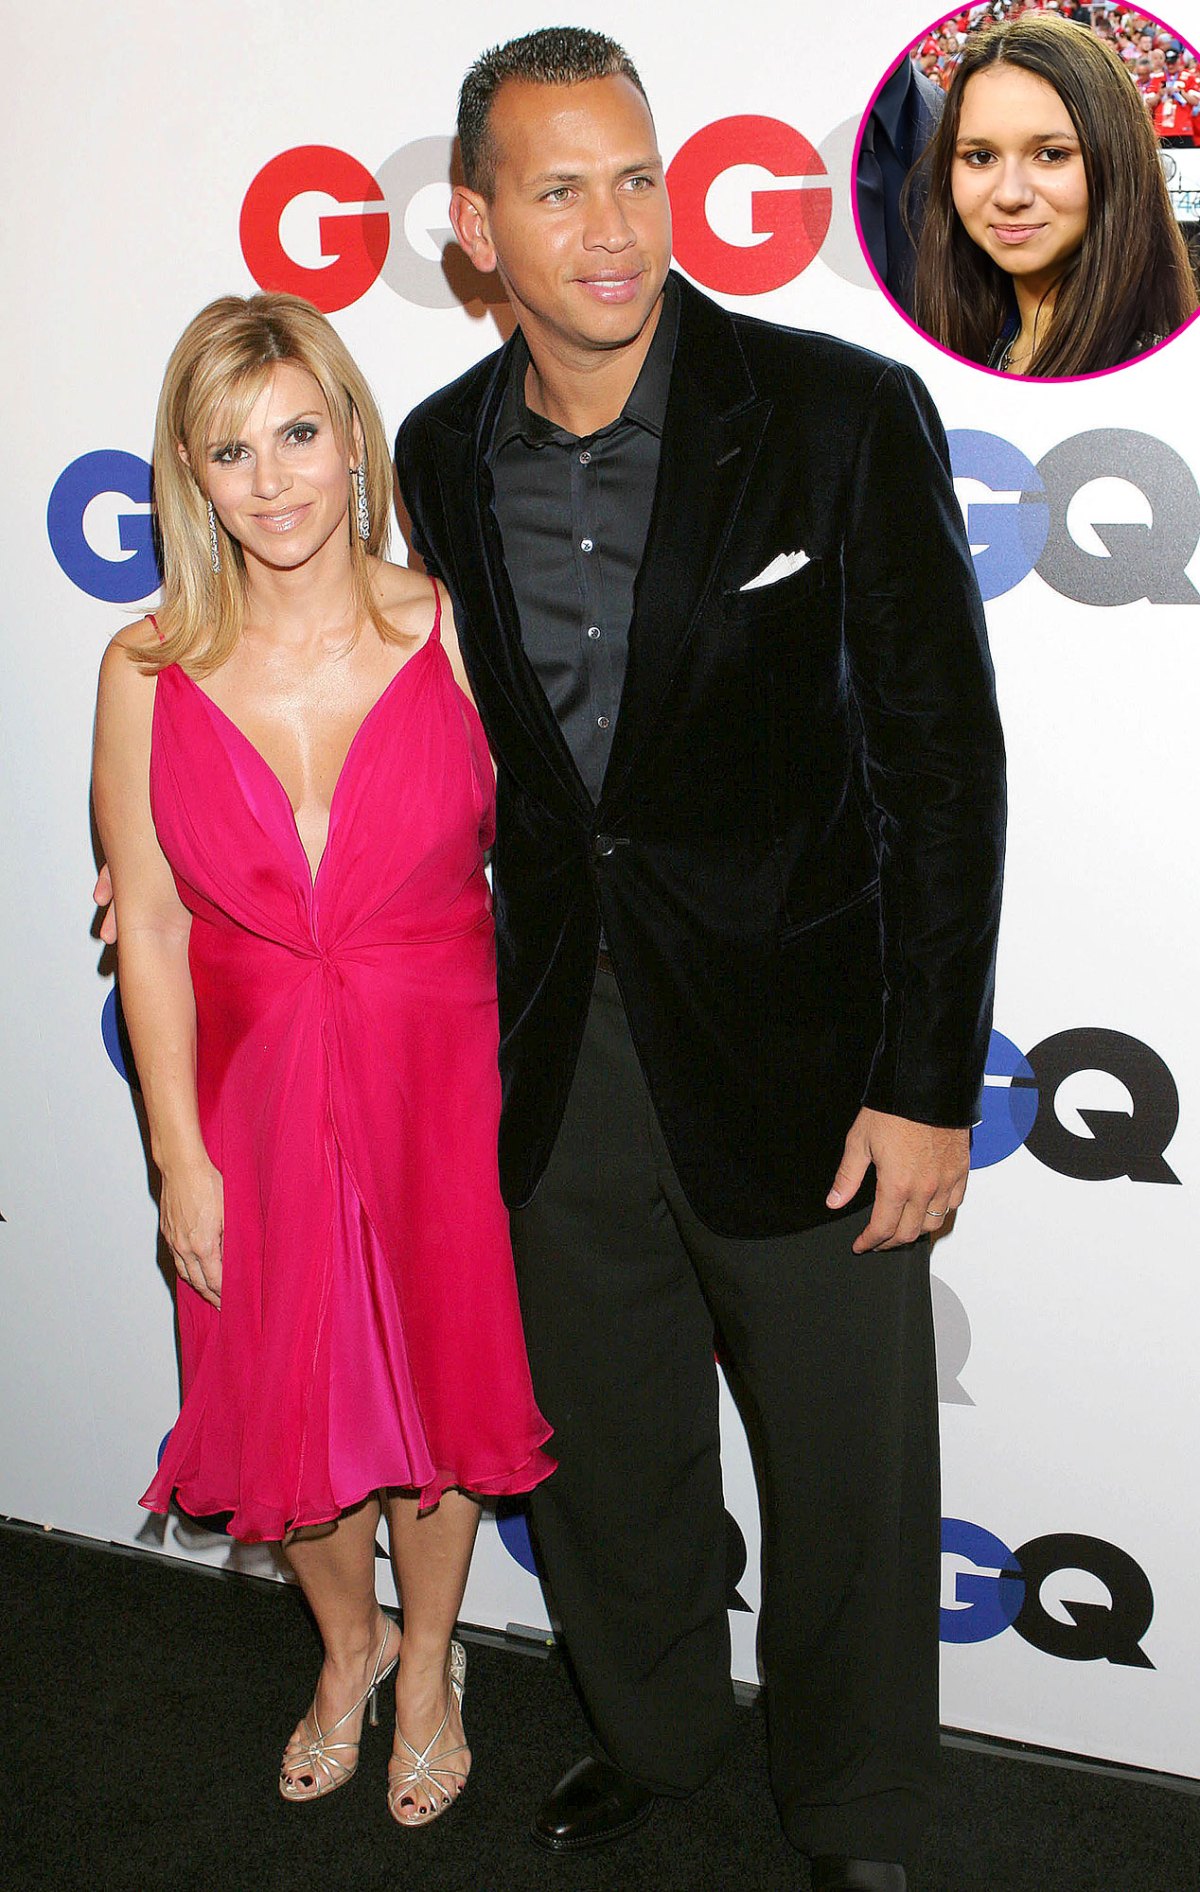 Alex Rodriguez's Ex-Wife Cynthia Scurtis Apparently “Wasn't the